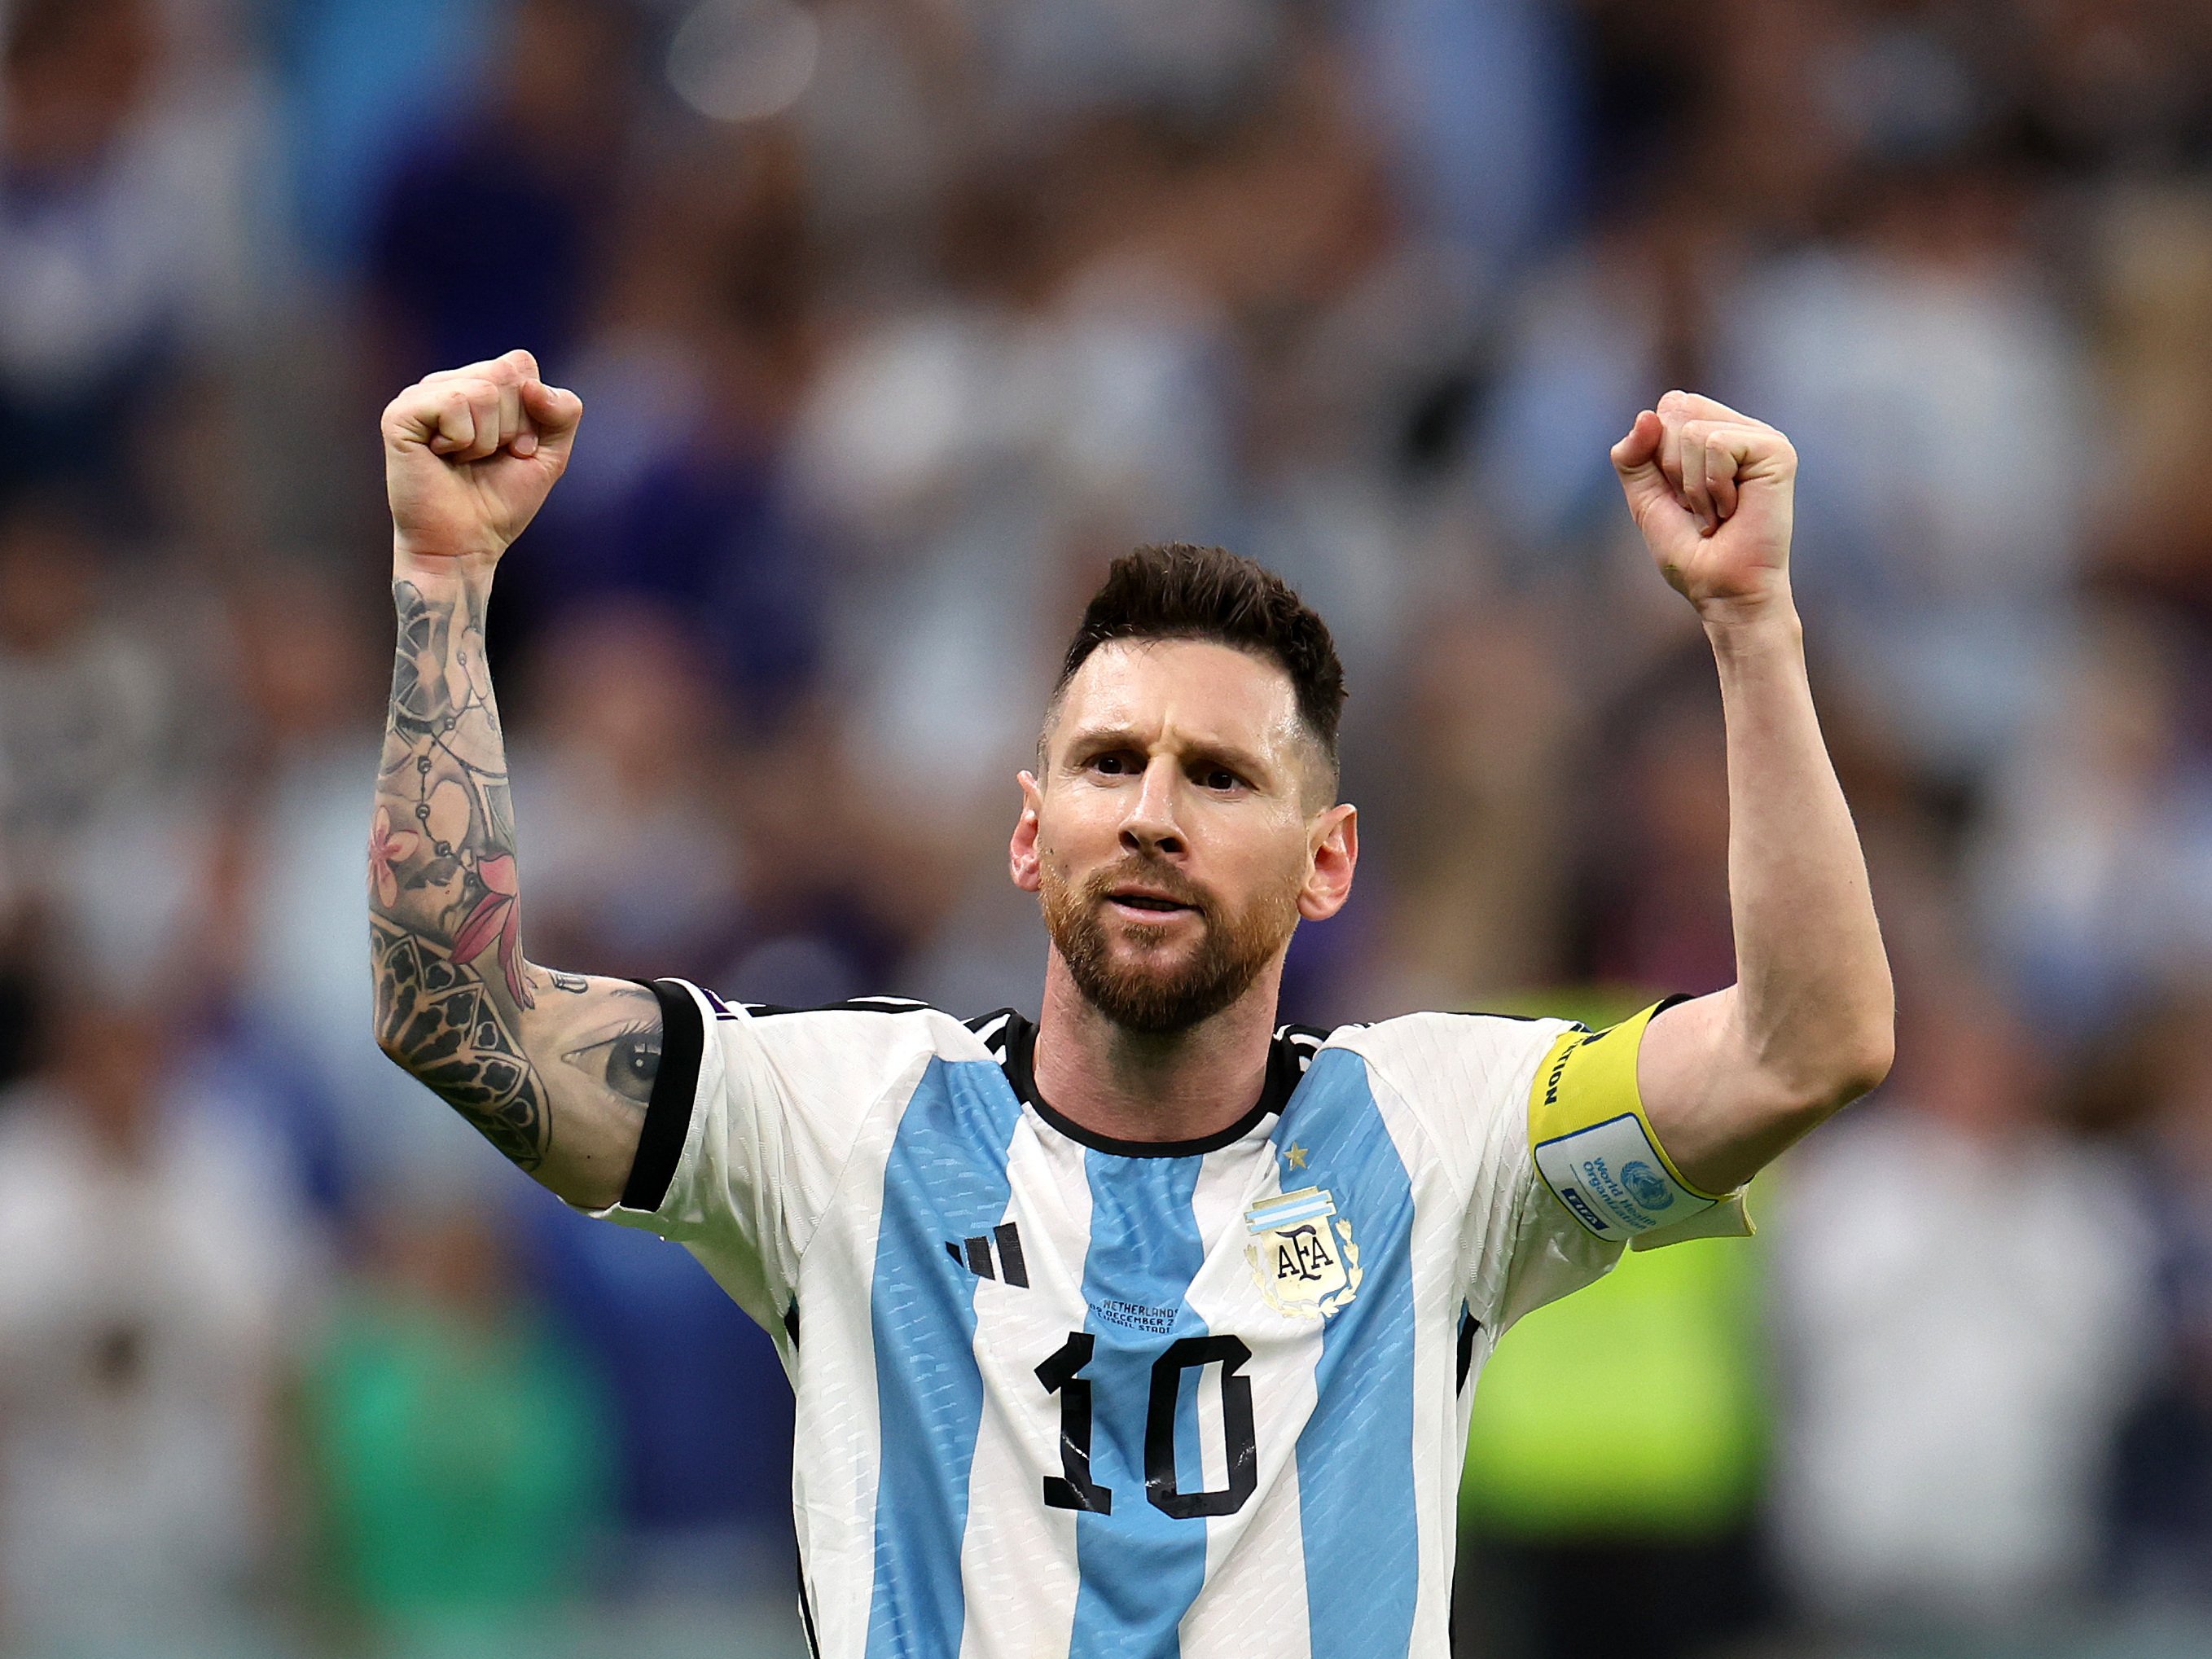 Argentina beats the Netherlands in penalty kicks at the World Cup quarterfinals